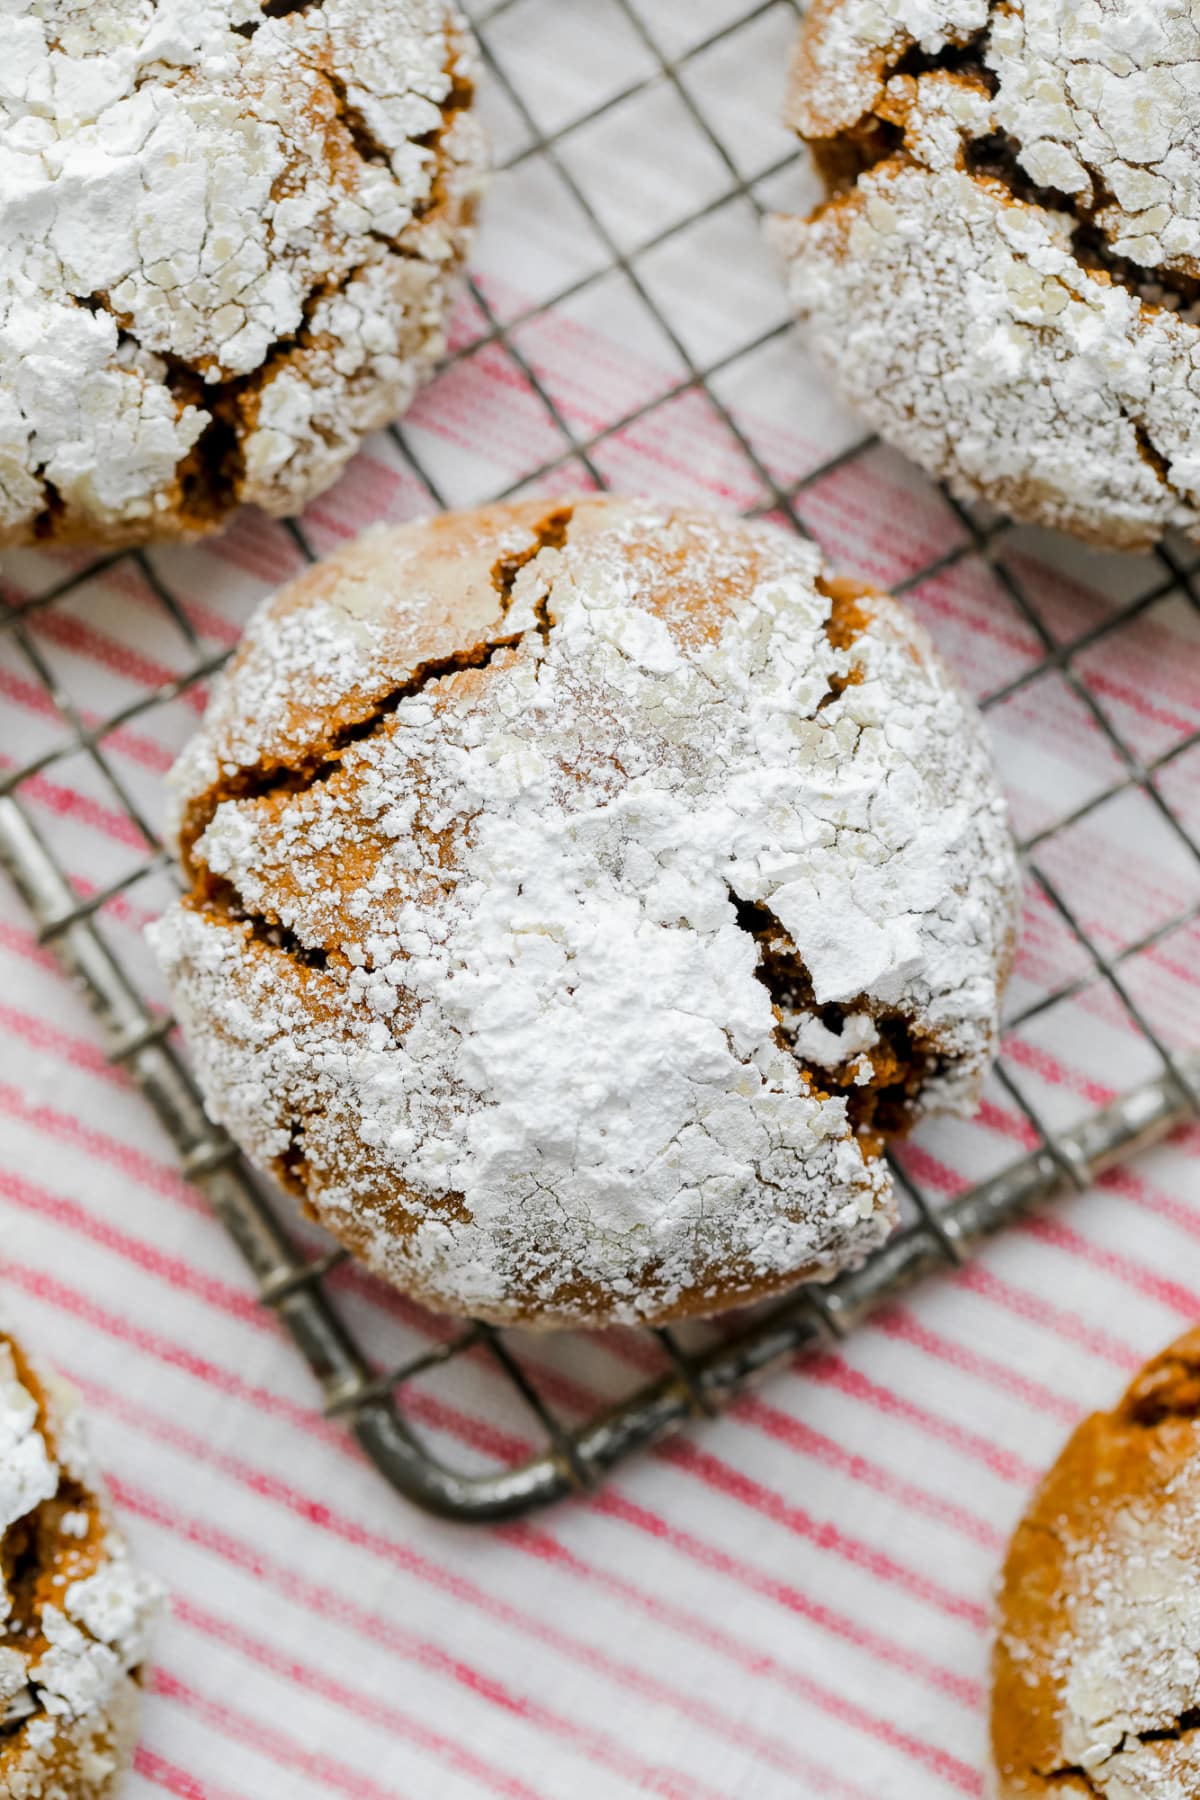 red and white towel in background of cookies with powdered sugar and crinkles.